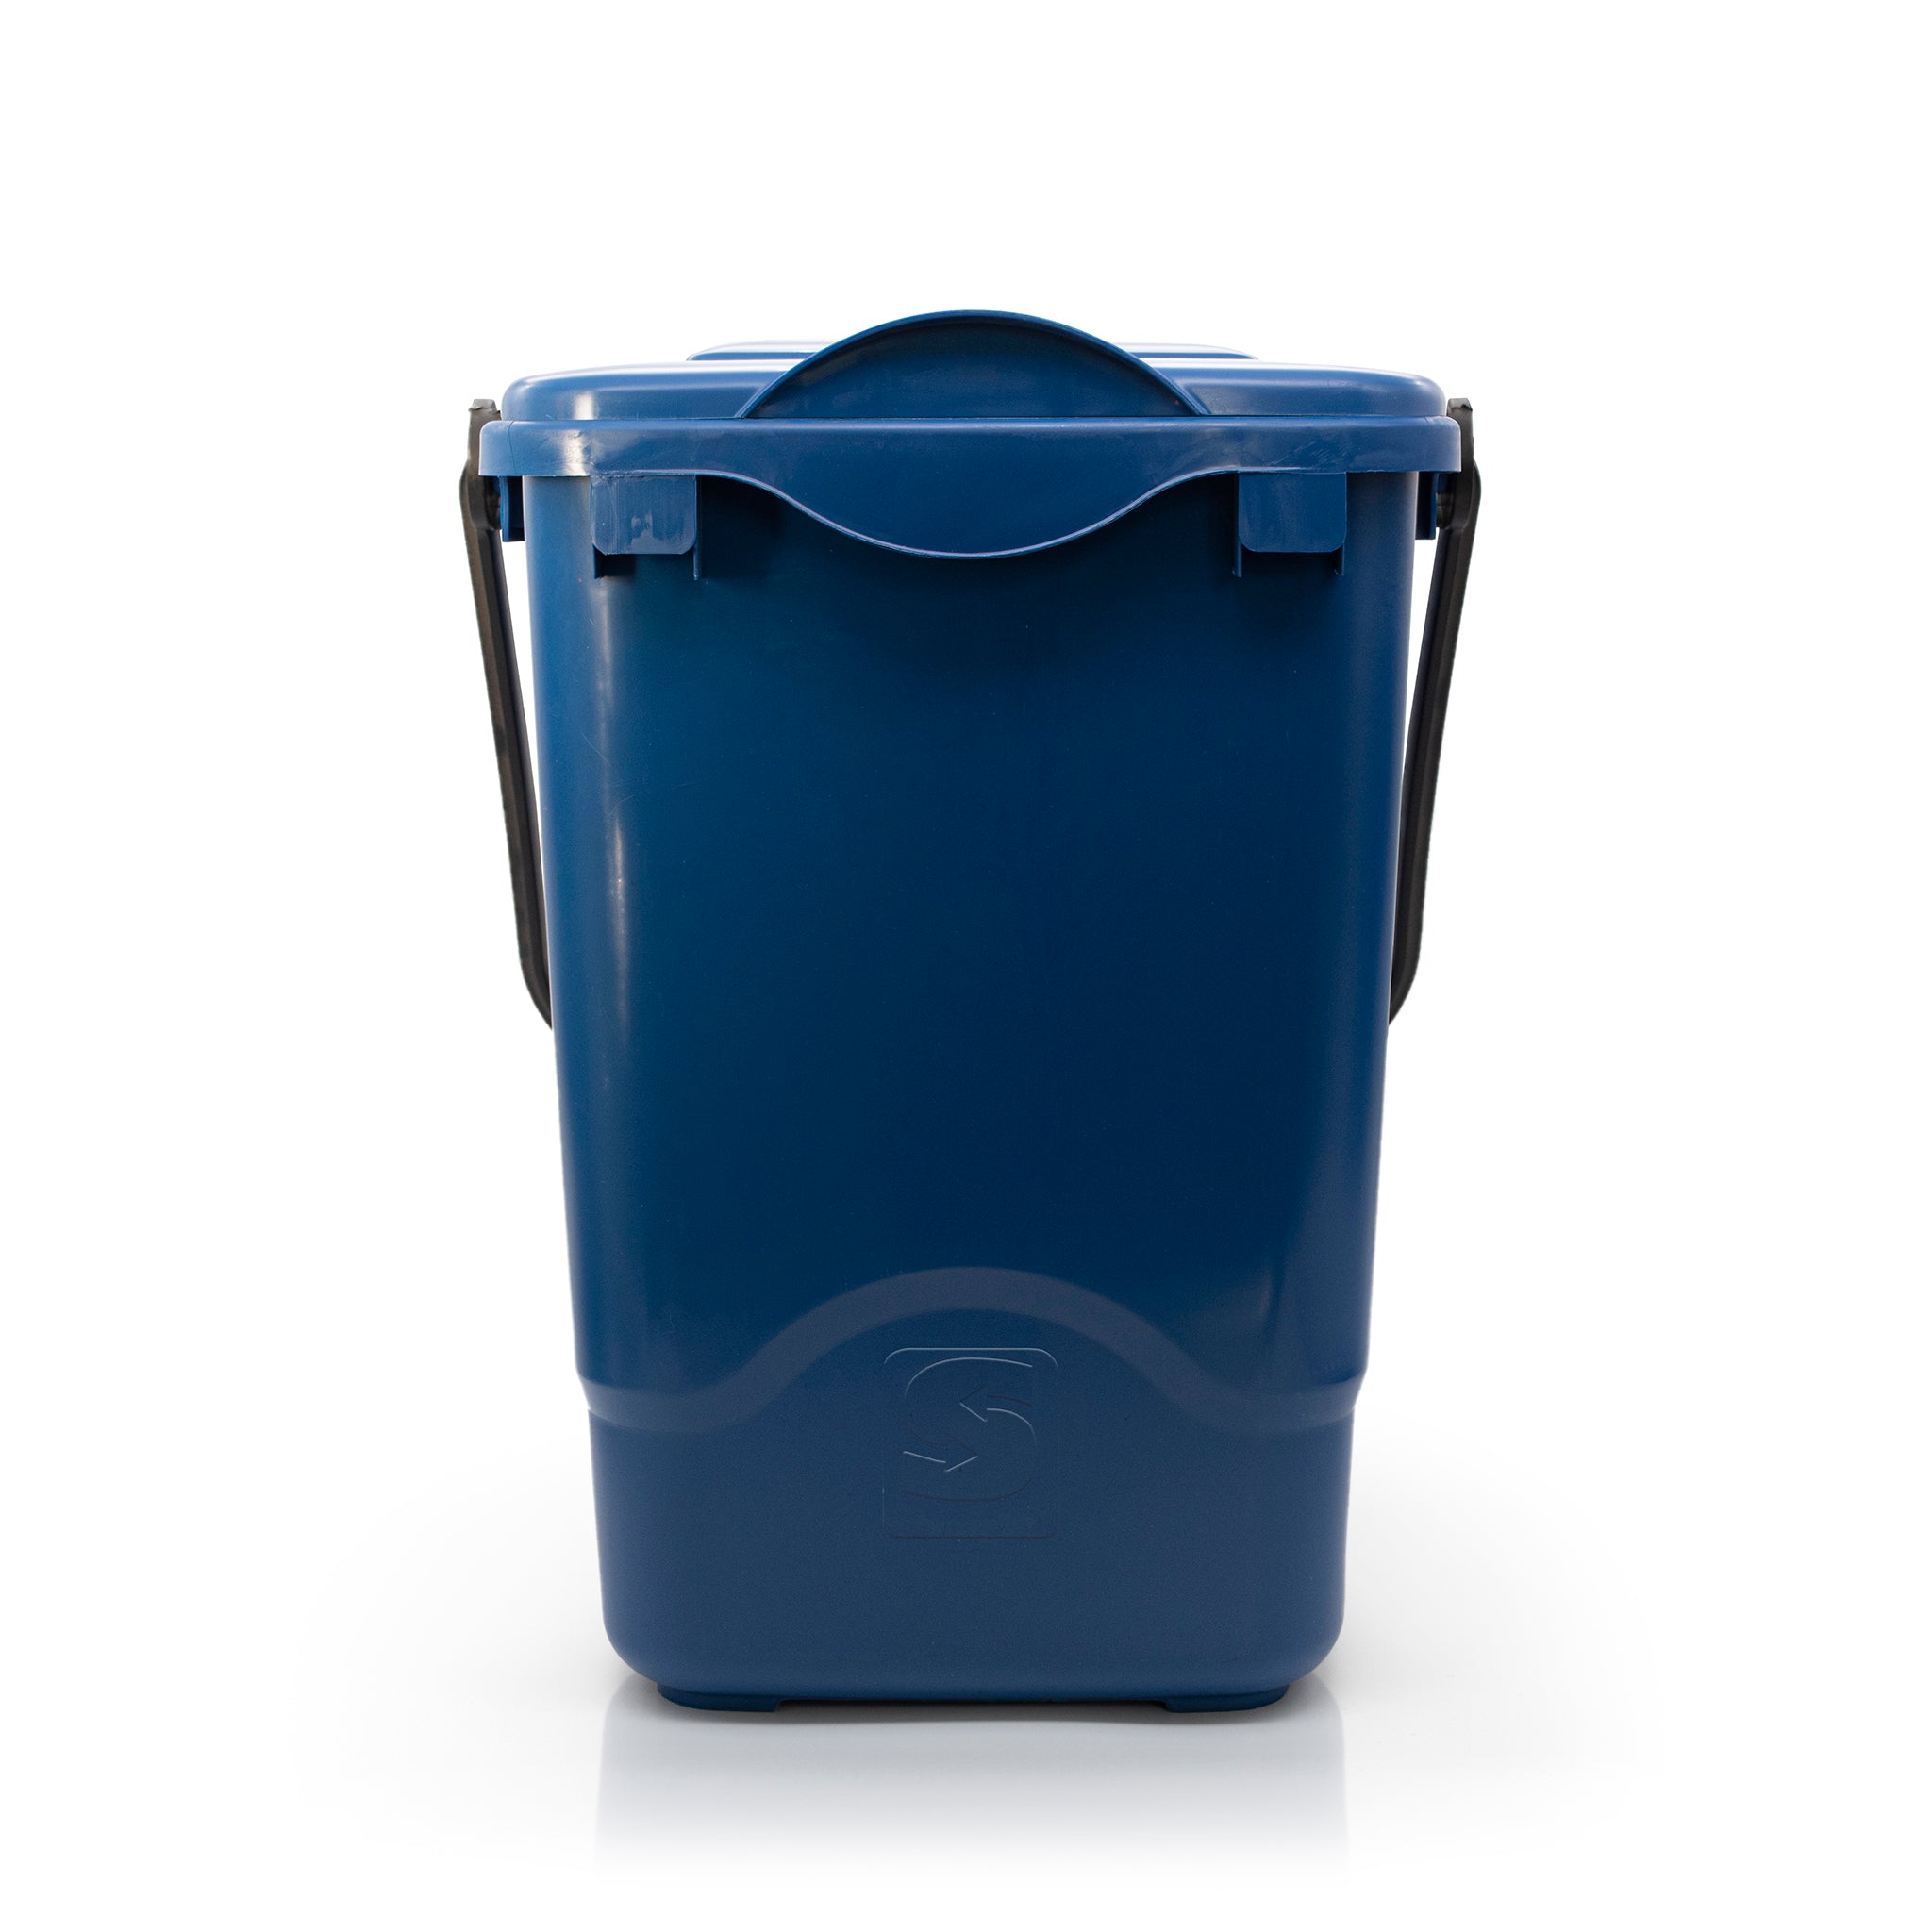 Front of blue bin with lid on a white background